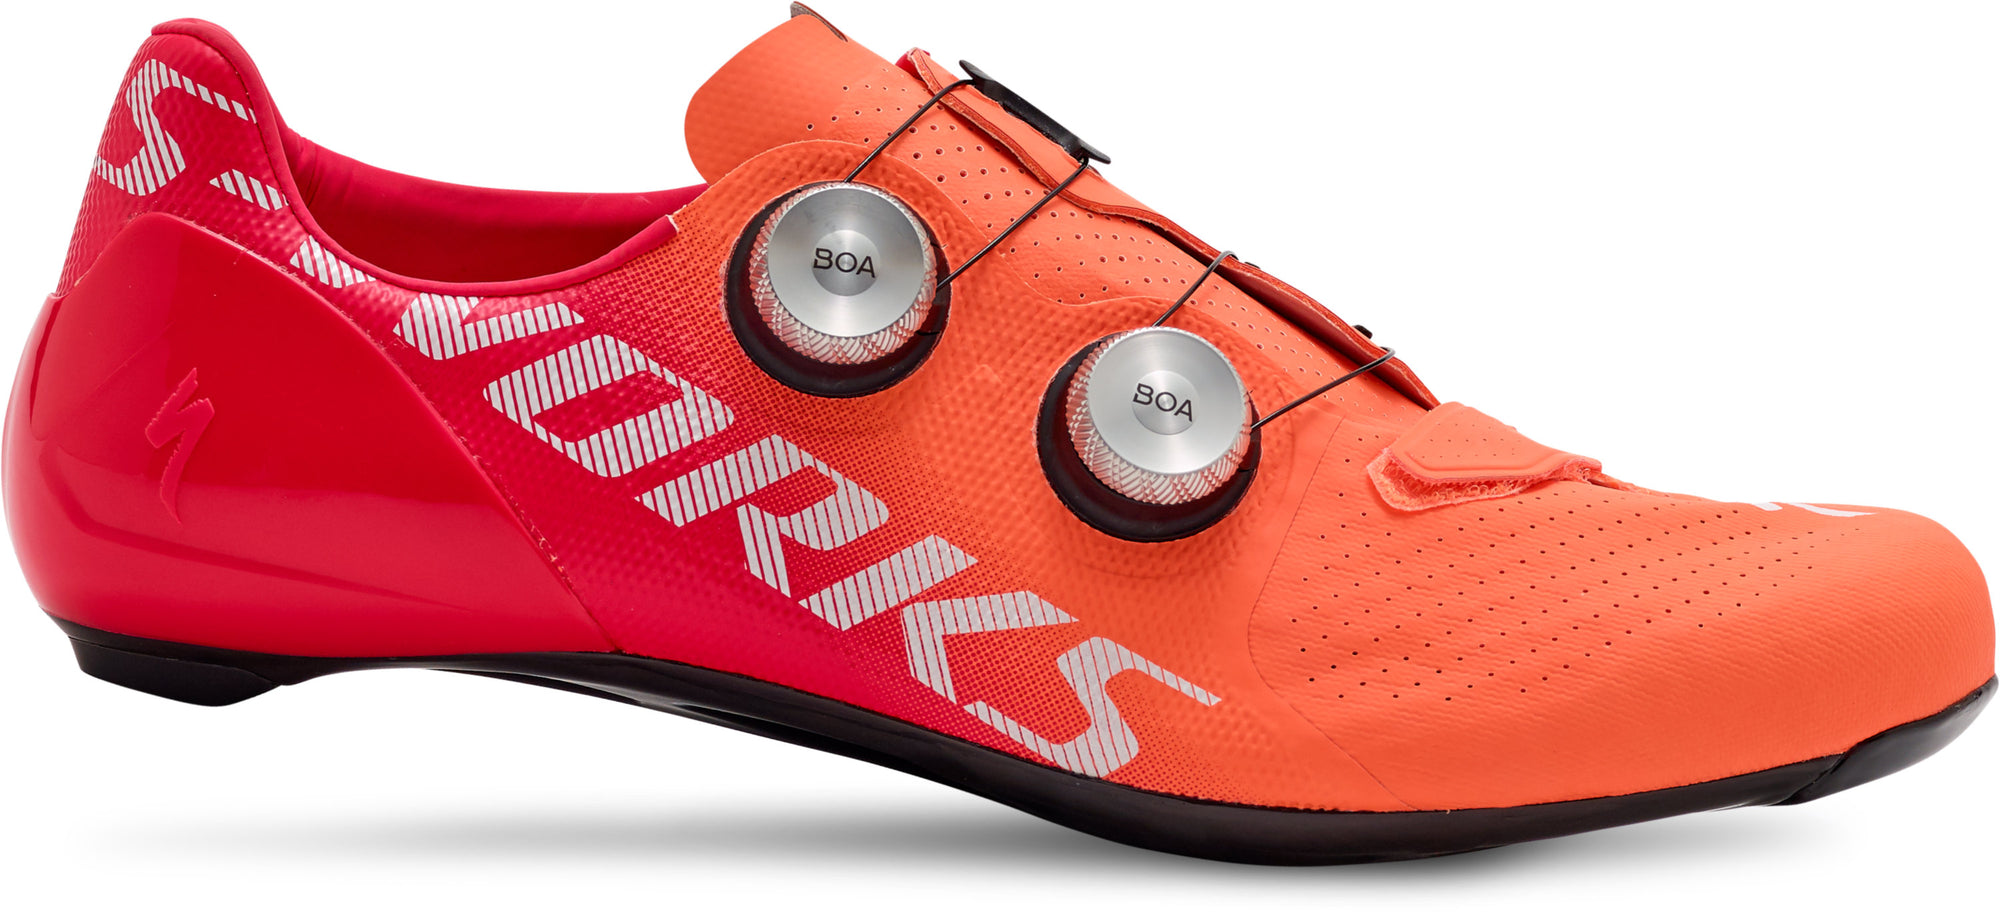 S-Works 7 Road Shoes – Down Under LTD | Specialized Philippines